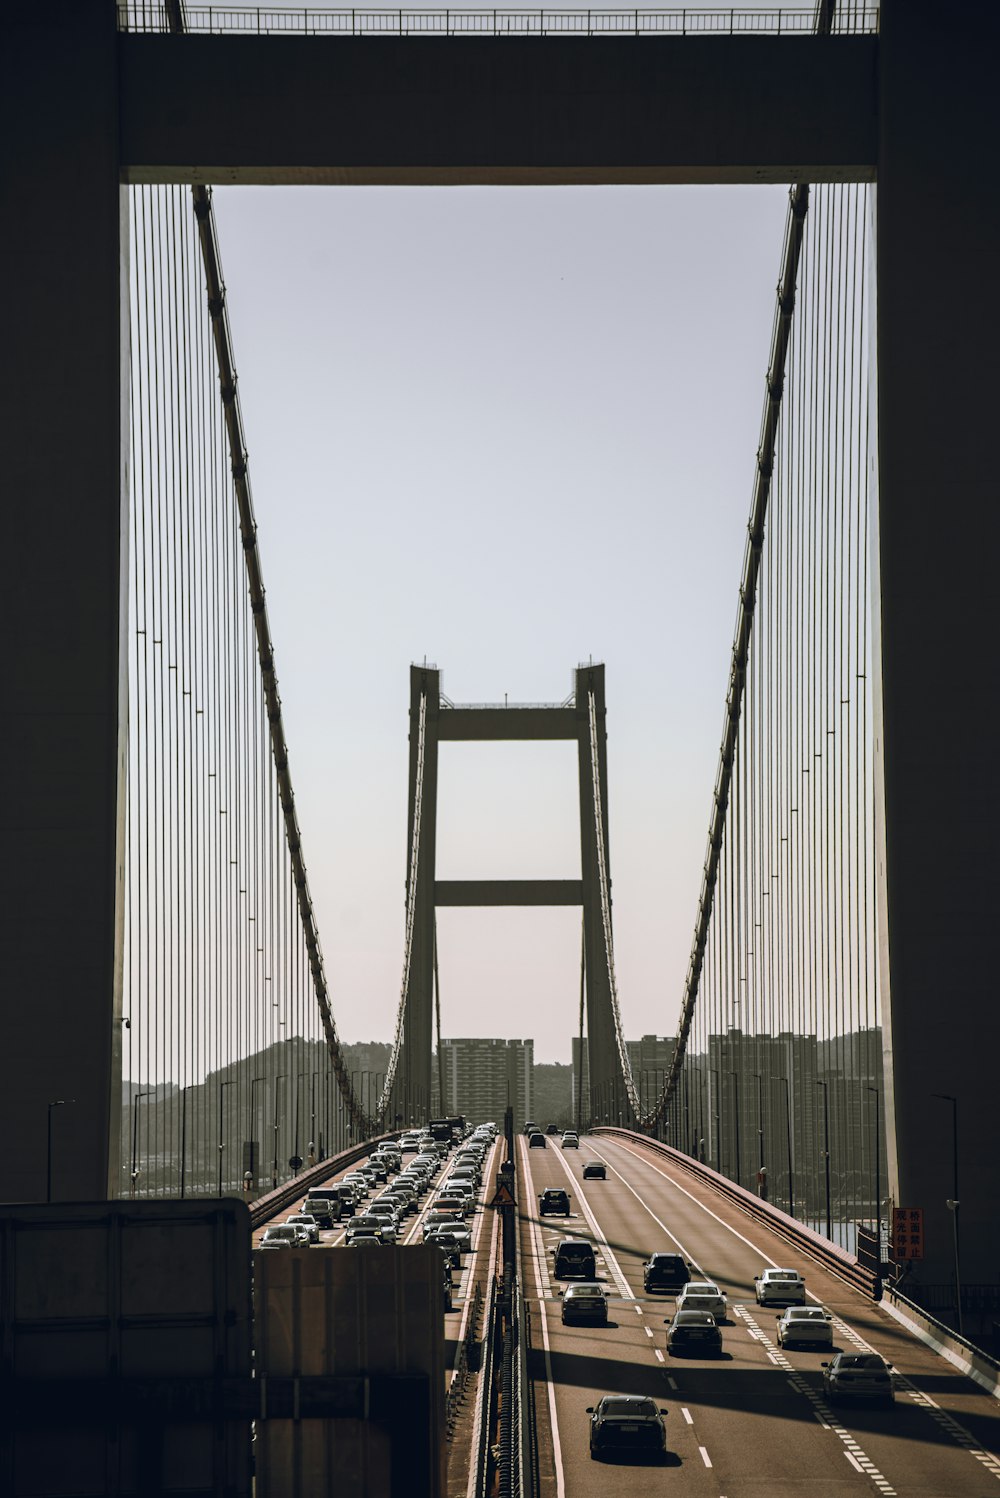 a view of a bridge with cars driving on it